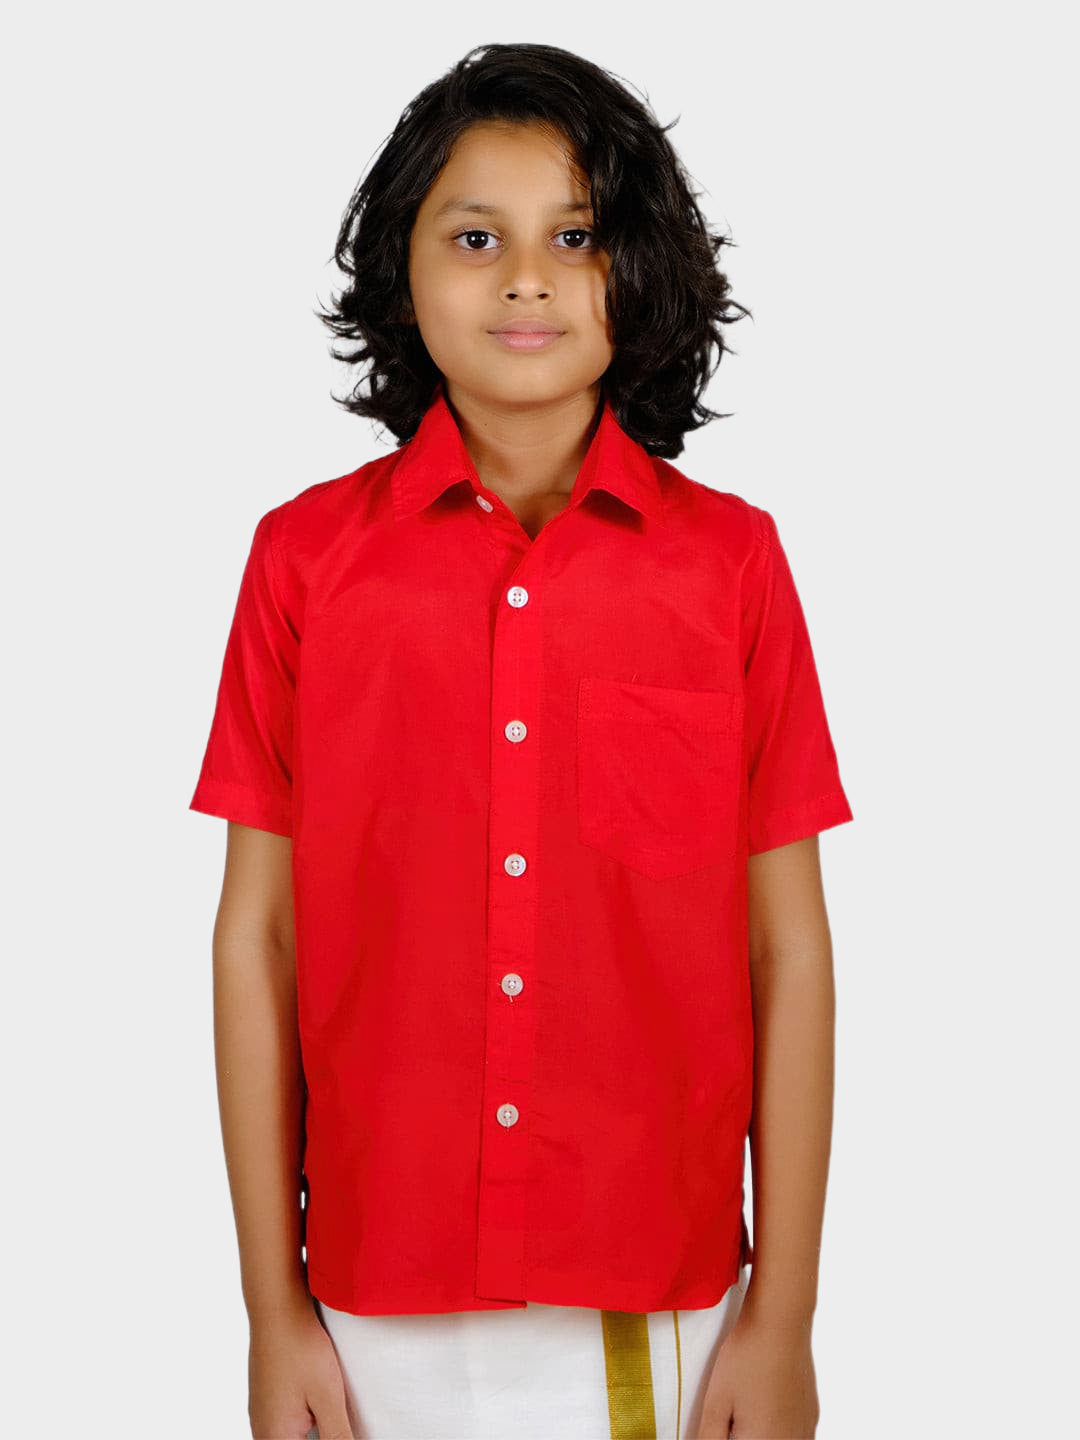 Boys Red Colour Polyester Shirt